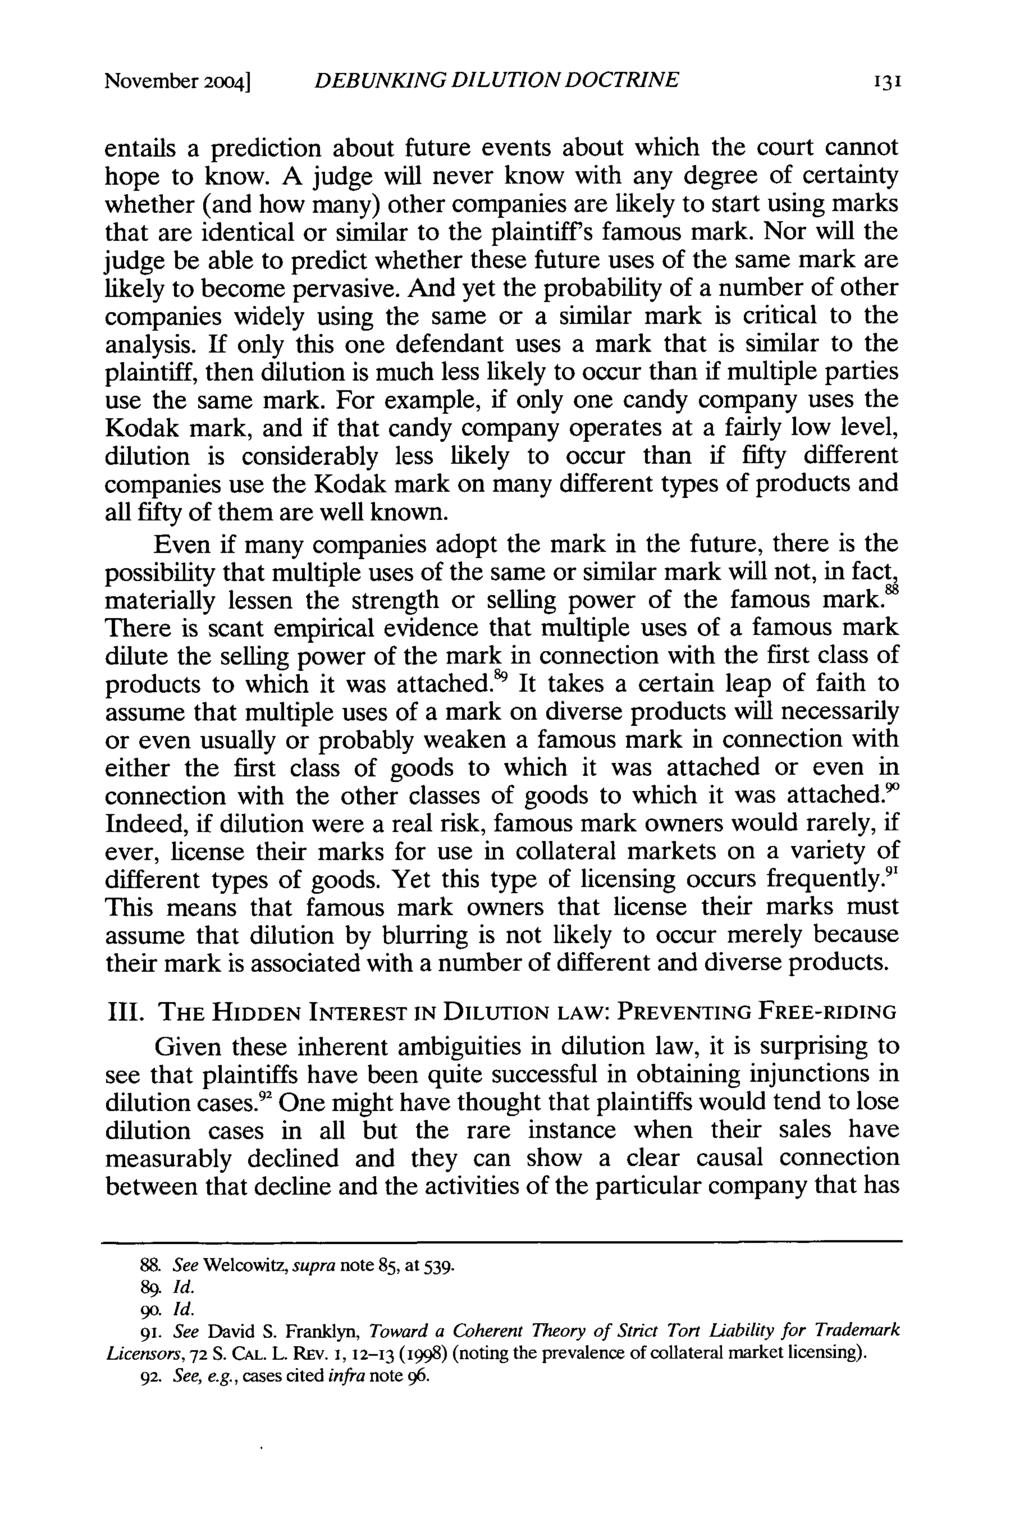 November 2004] DEBUNKING DILUTION DOCTRINE entails a prediction about future events about which the court cannot hope to know.